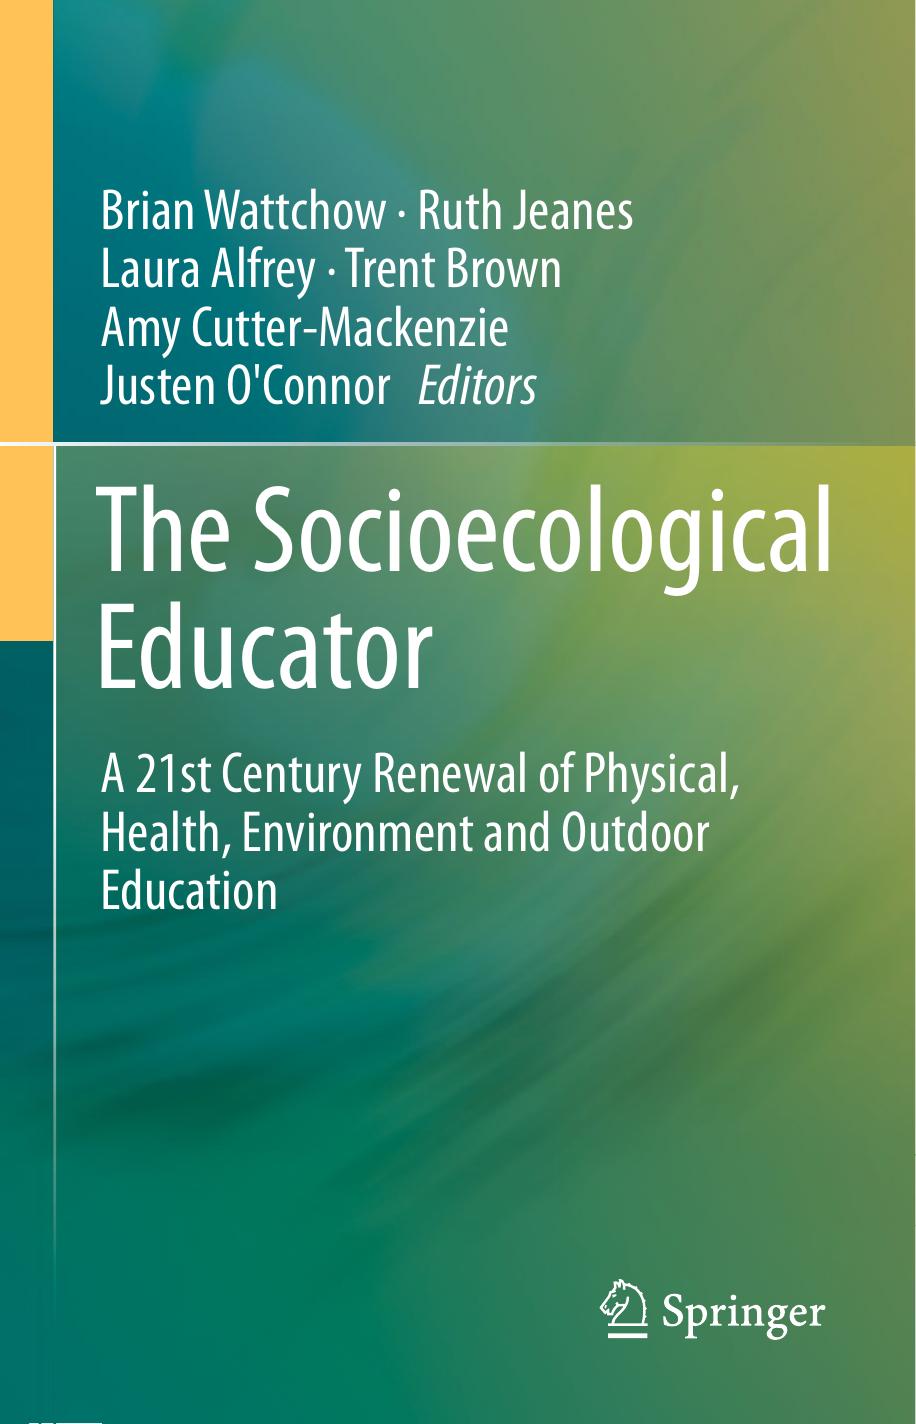 The Socioecological Educator A 21st Century Renewal of Physical, Health 2014